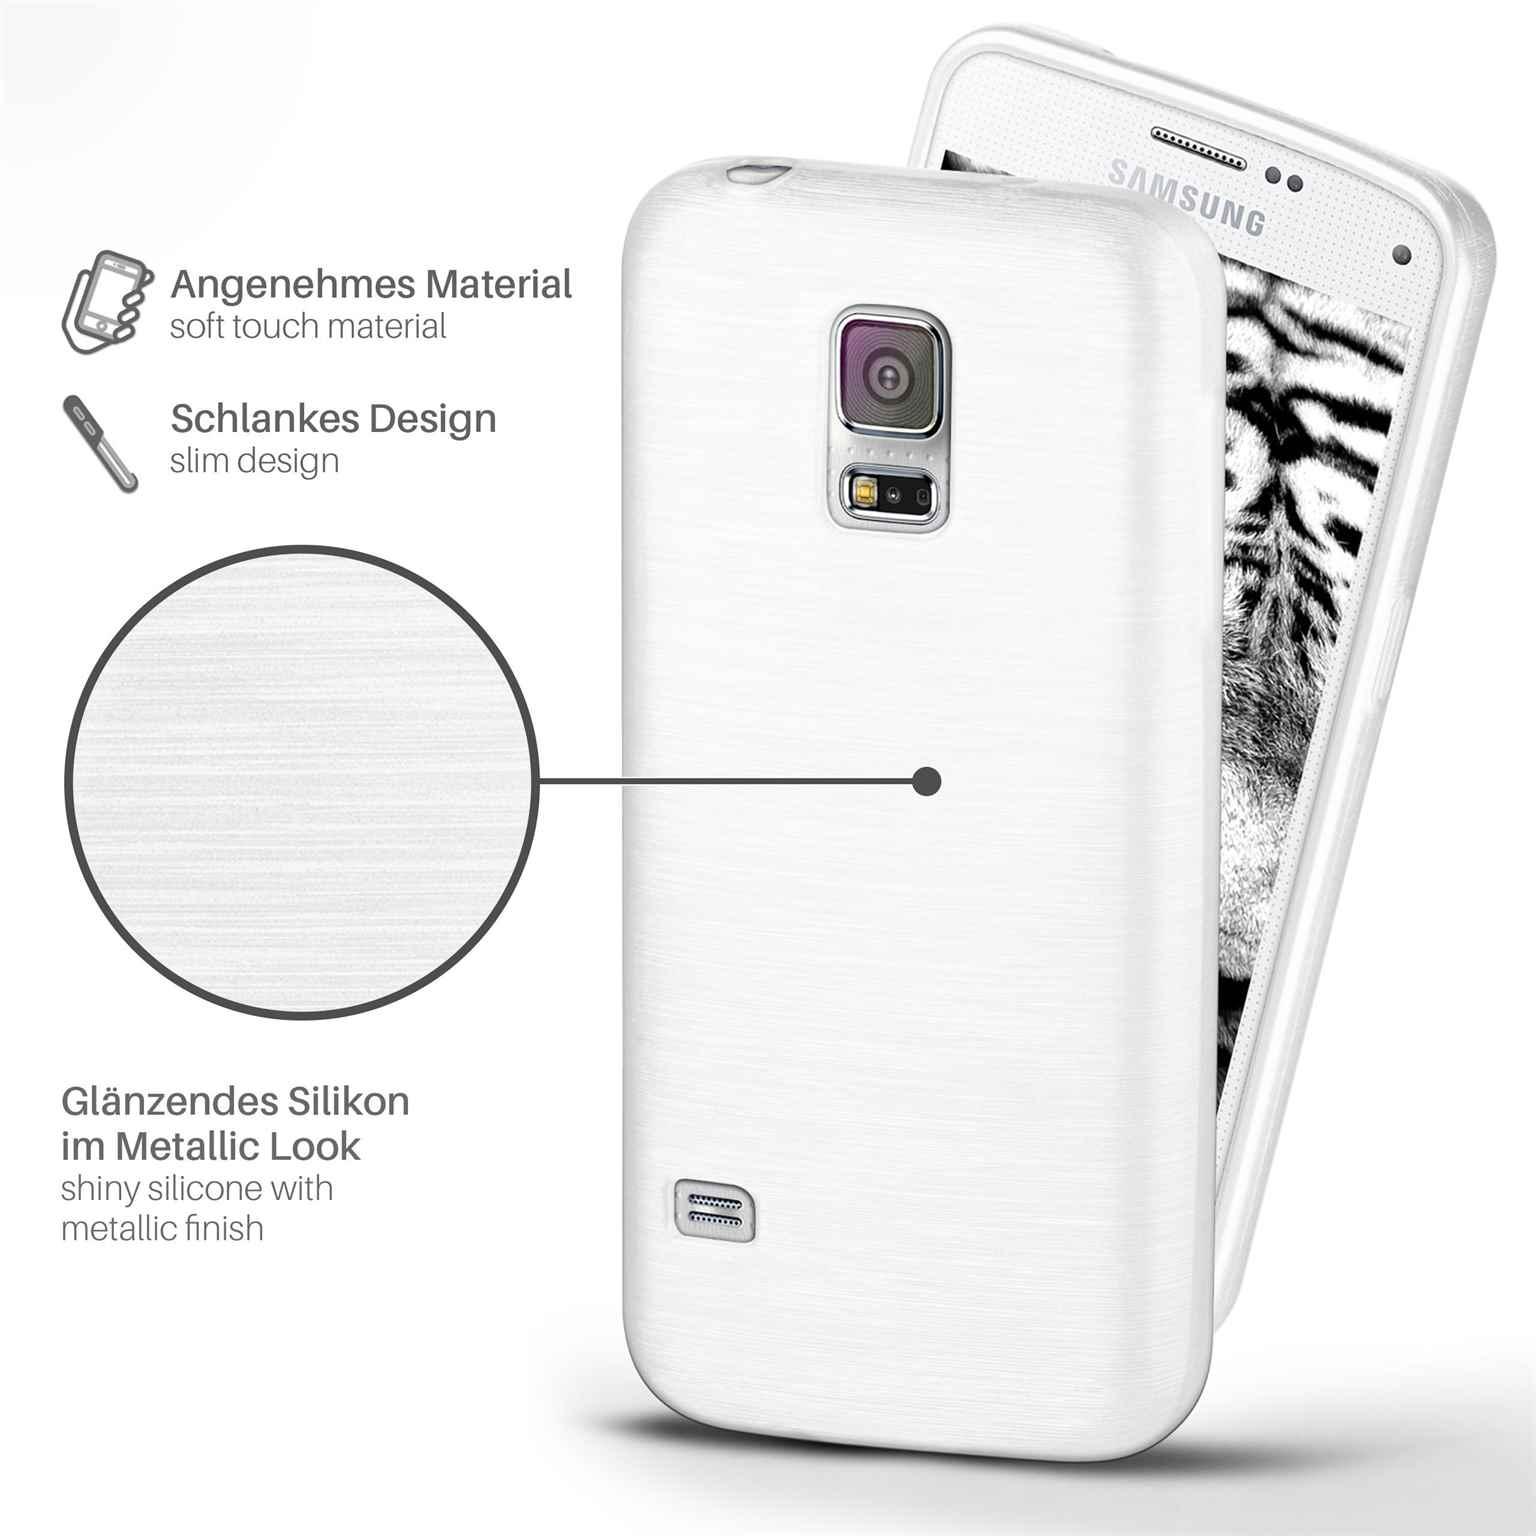 Backcover, Case, Galaxy Pearl-White S5, MOEX Brushed Samsung,